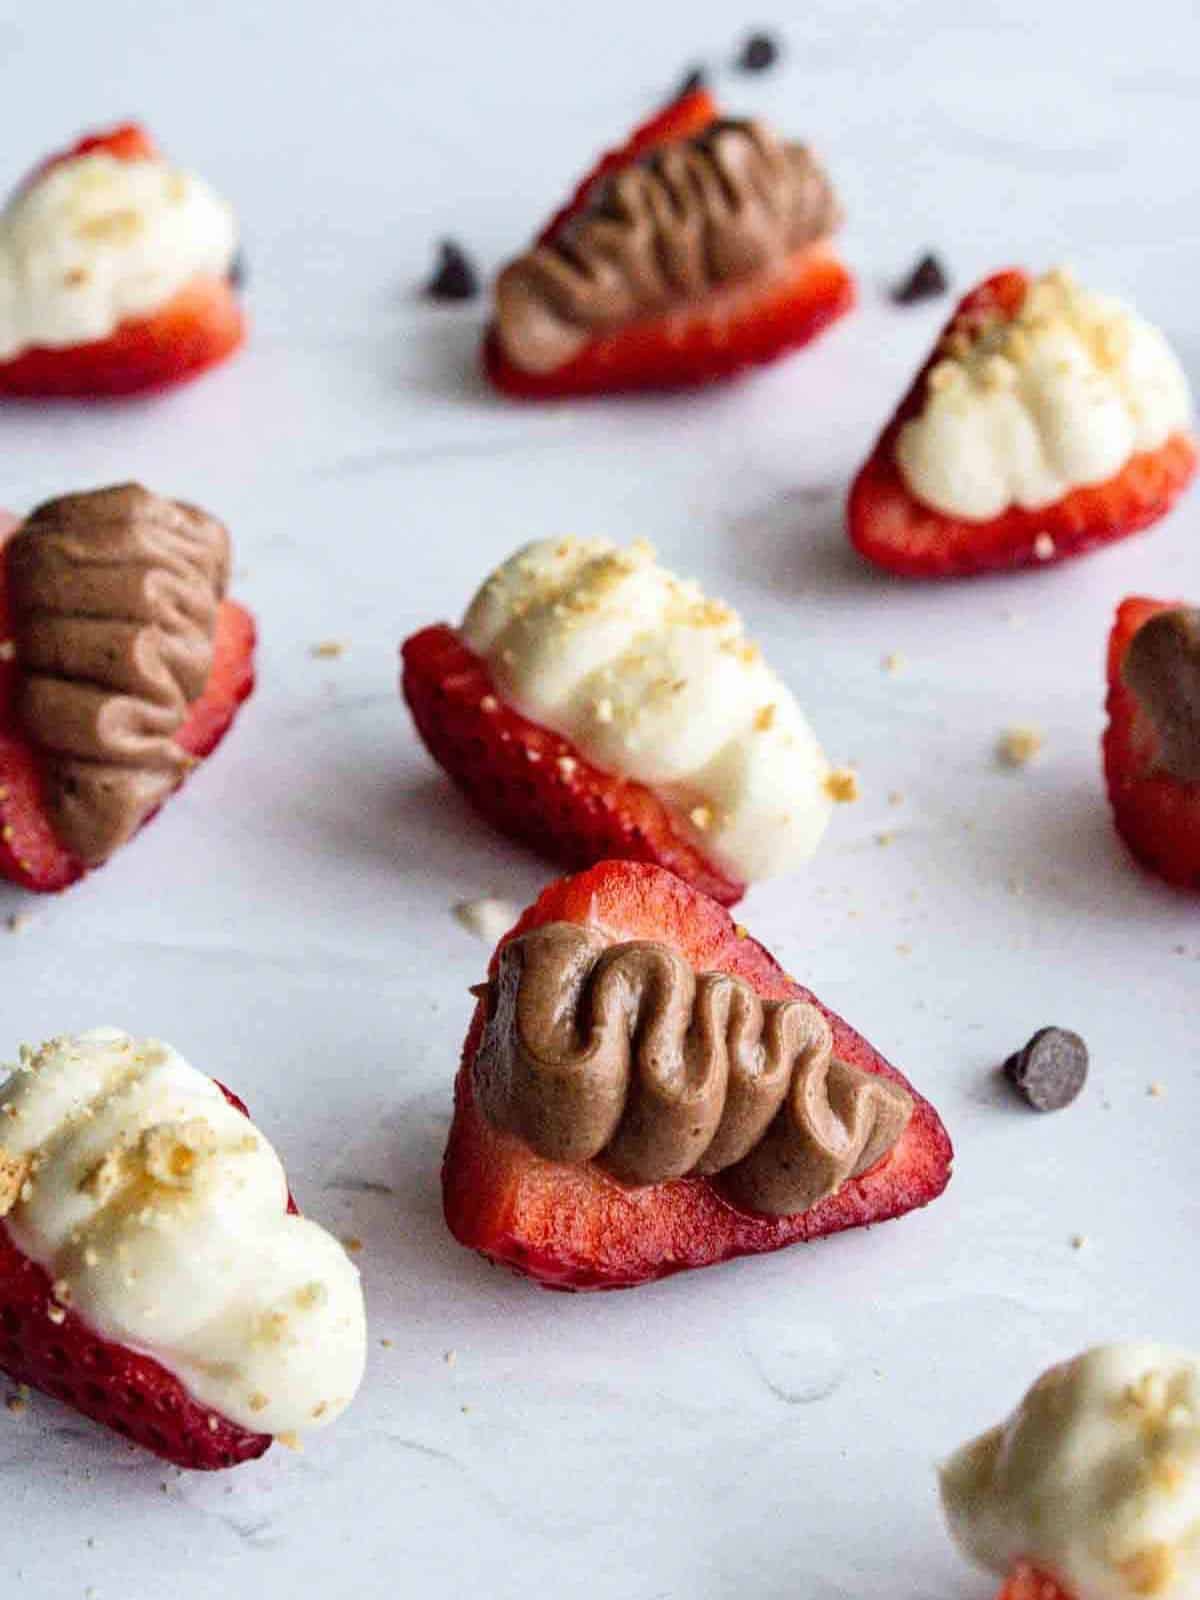 Lip-smacking fresh Strawberries stuffed with a creamy, fluffy no bake plain and chocolate Cheesecake filling